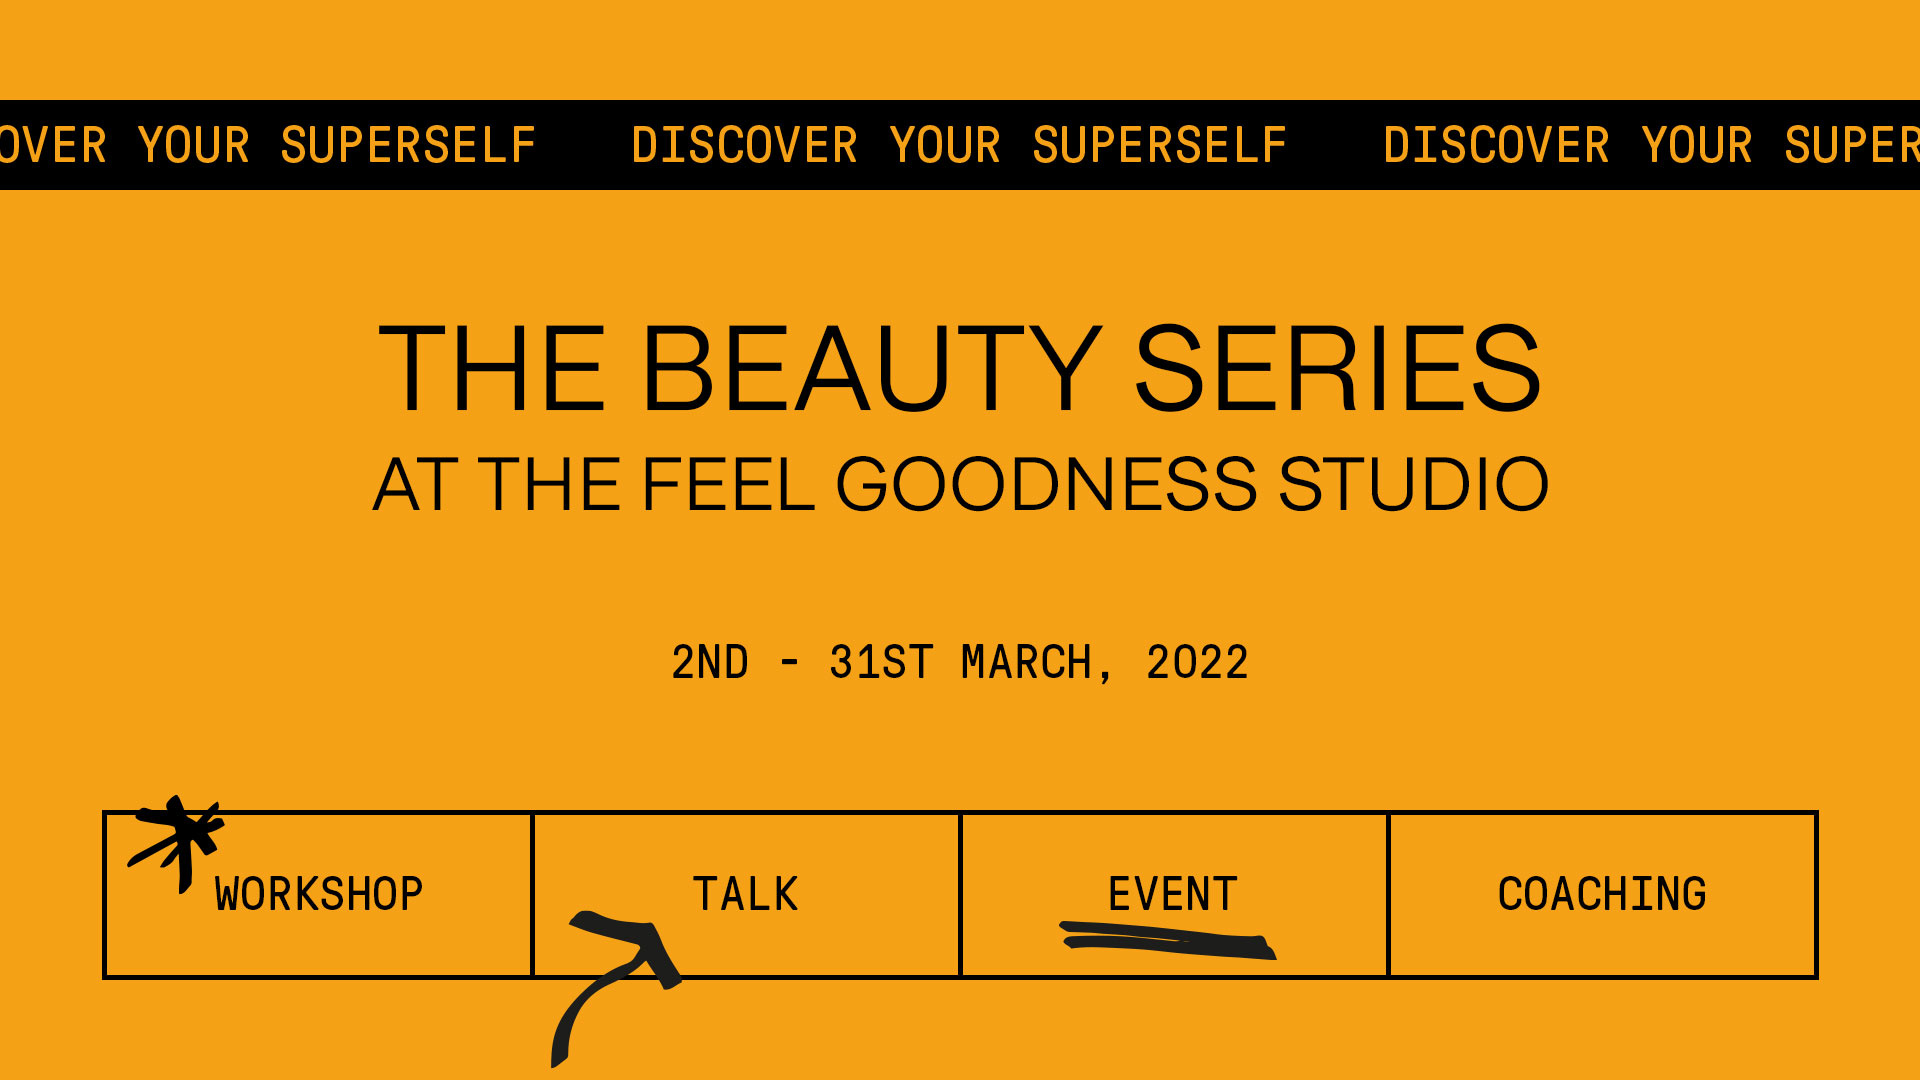 The Beauty Series at the Feel Goodness Studio at Selfridges London